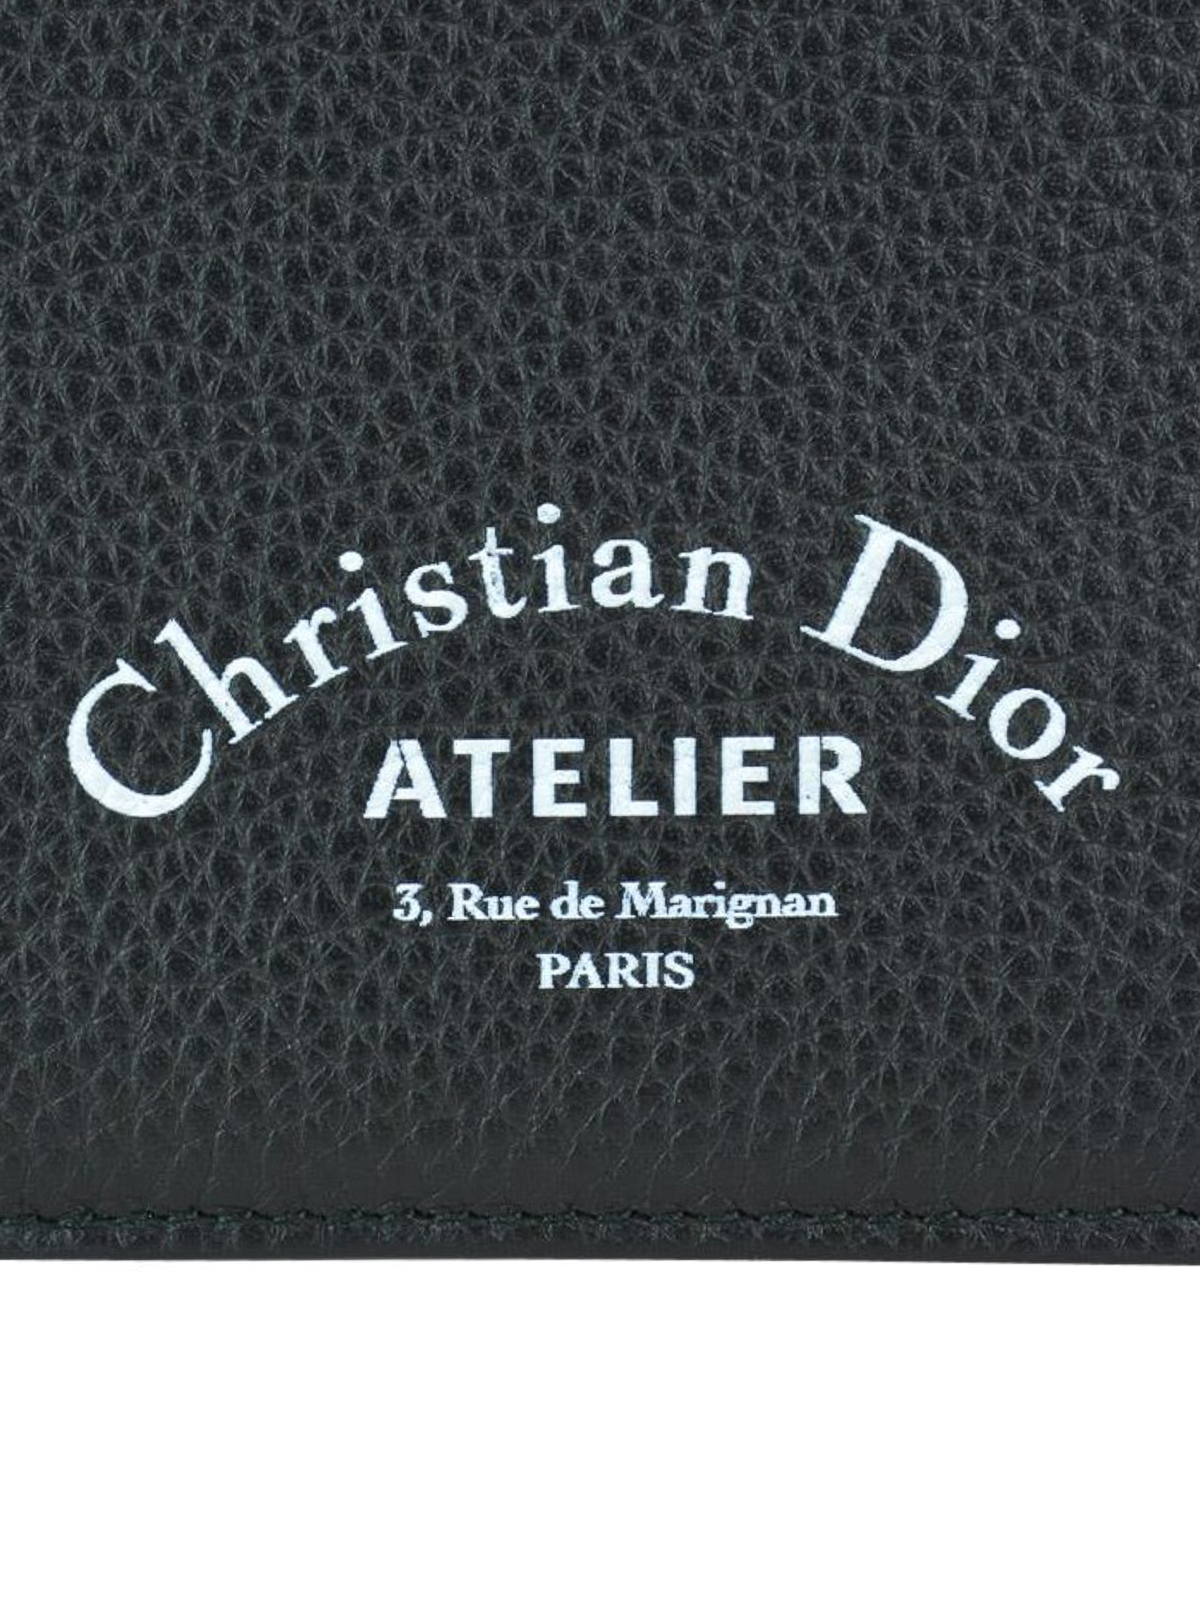 Wallets & purses Dior - Christian Dior Atelier grained leather wallet ...